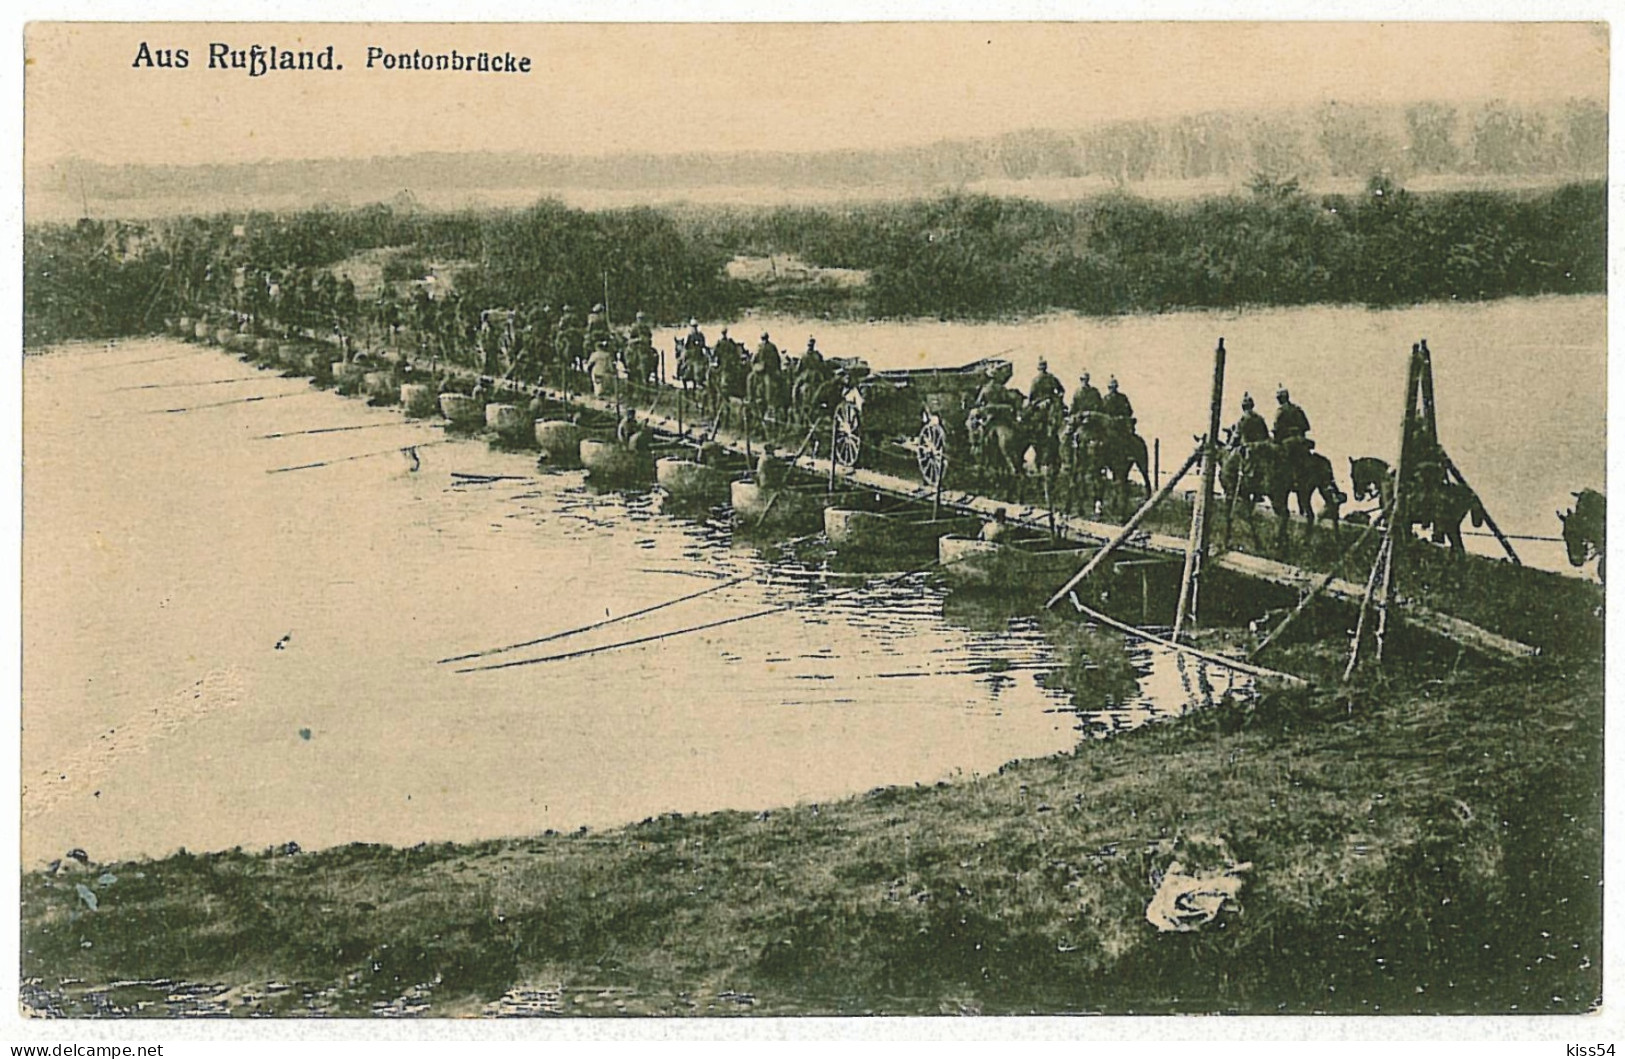 RUS 57 - 5061 Russian Army On The Pontoon, Russia - Old Postcard - Used - 1916 - Russia